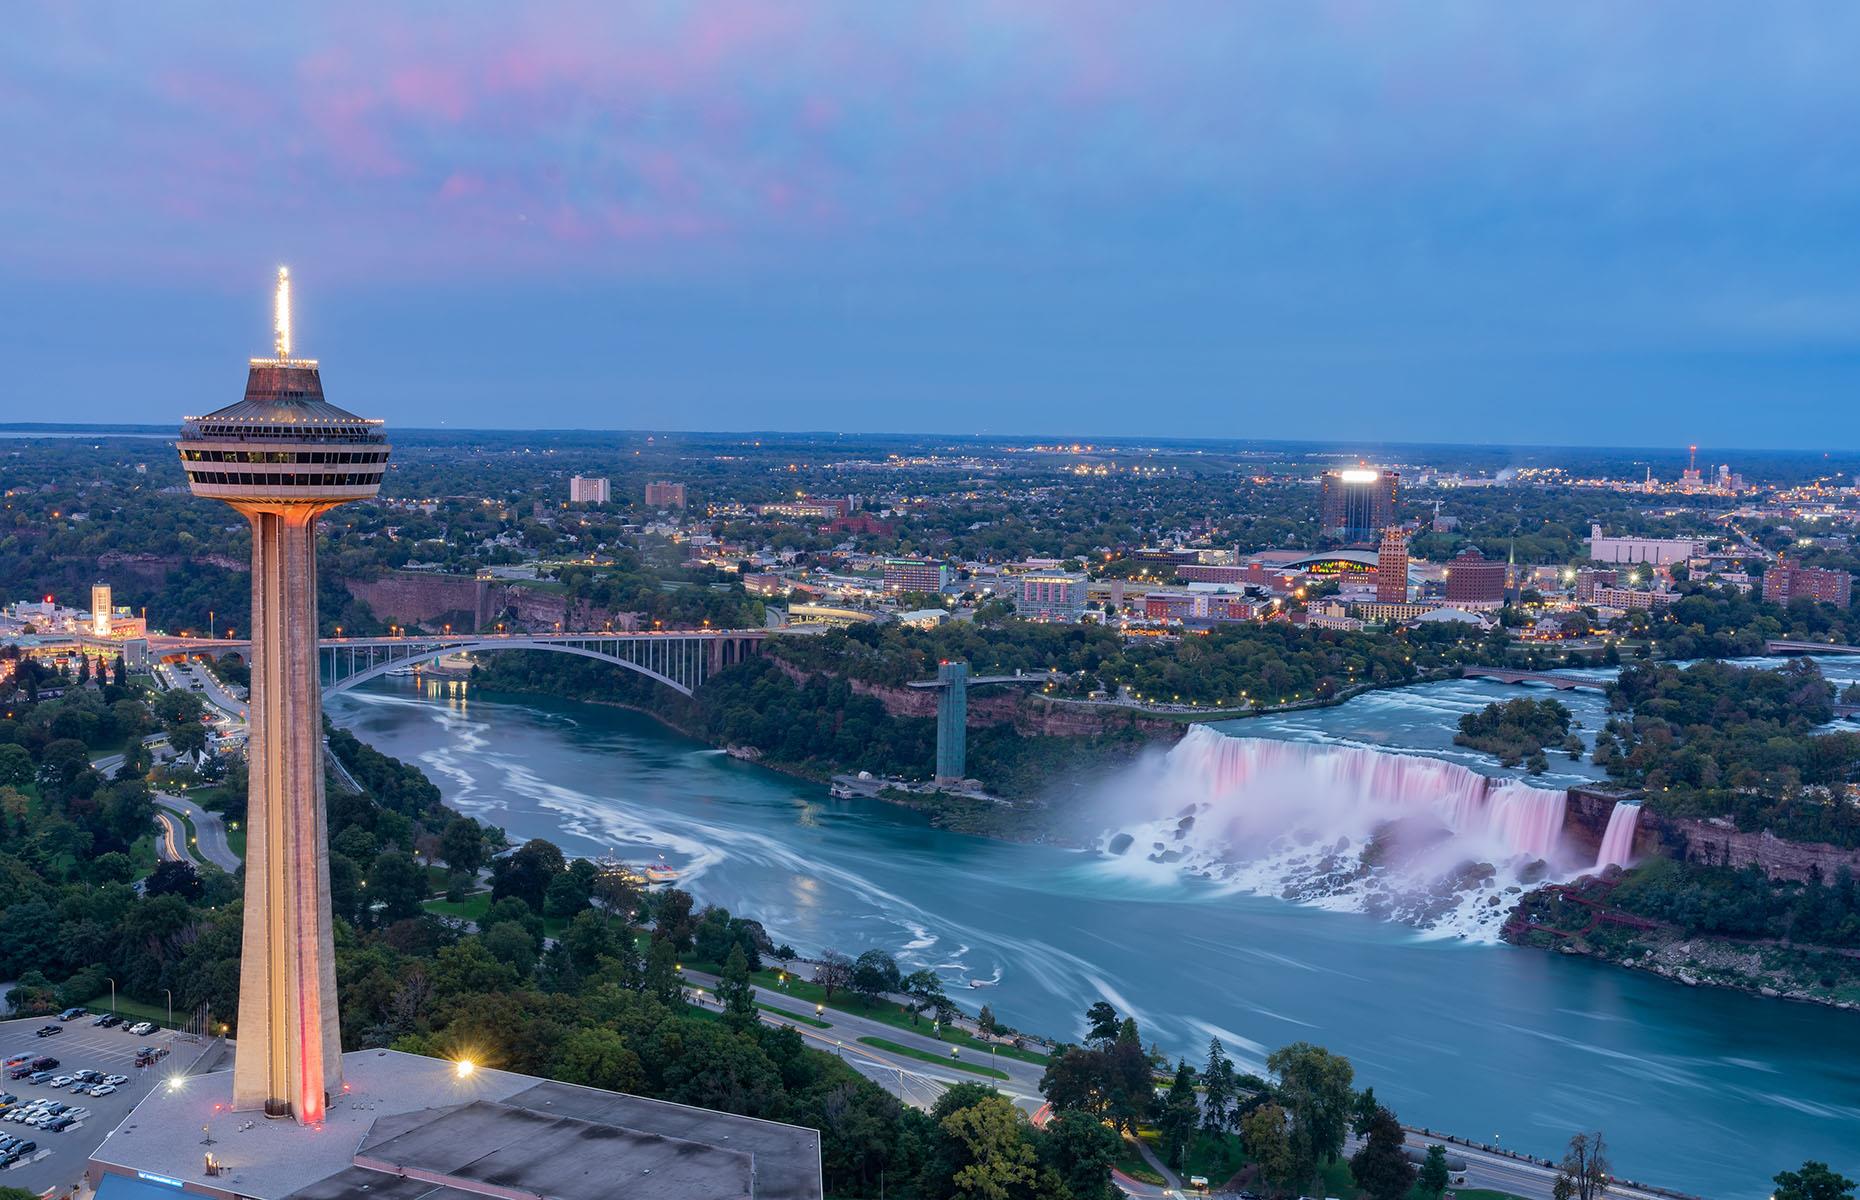 <p>From Toronto-Pearson International, you can board a Niagara Airbus shuttle to the Niagara region. Alternatively, it's a 90-minute drive in a hire car or booked taxi.</p>  <p><em>For more information, visit <a href="https://www.niagaraparks.com/">niagaraparks.com</a> and <a href="https://travel.destinationcanada.com/en-ca">travel.destinationcanada.com/en-ca</a></em></p>  <p><a href="https://www.loveexploring.com/guides/143612/quebec-canada-top-things-to-do-where-to-stay-and-what-to-eat"><strong>Now discover the best things to see and do in Quebec</strong></a></p>